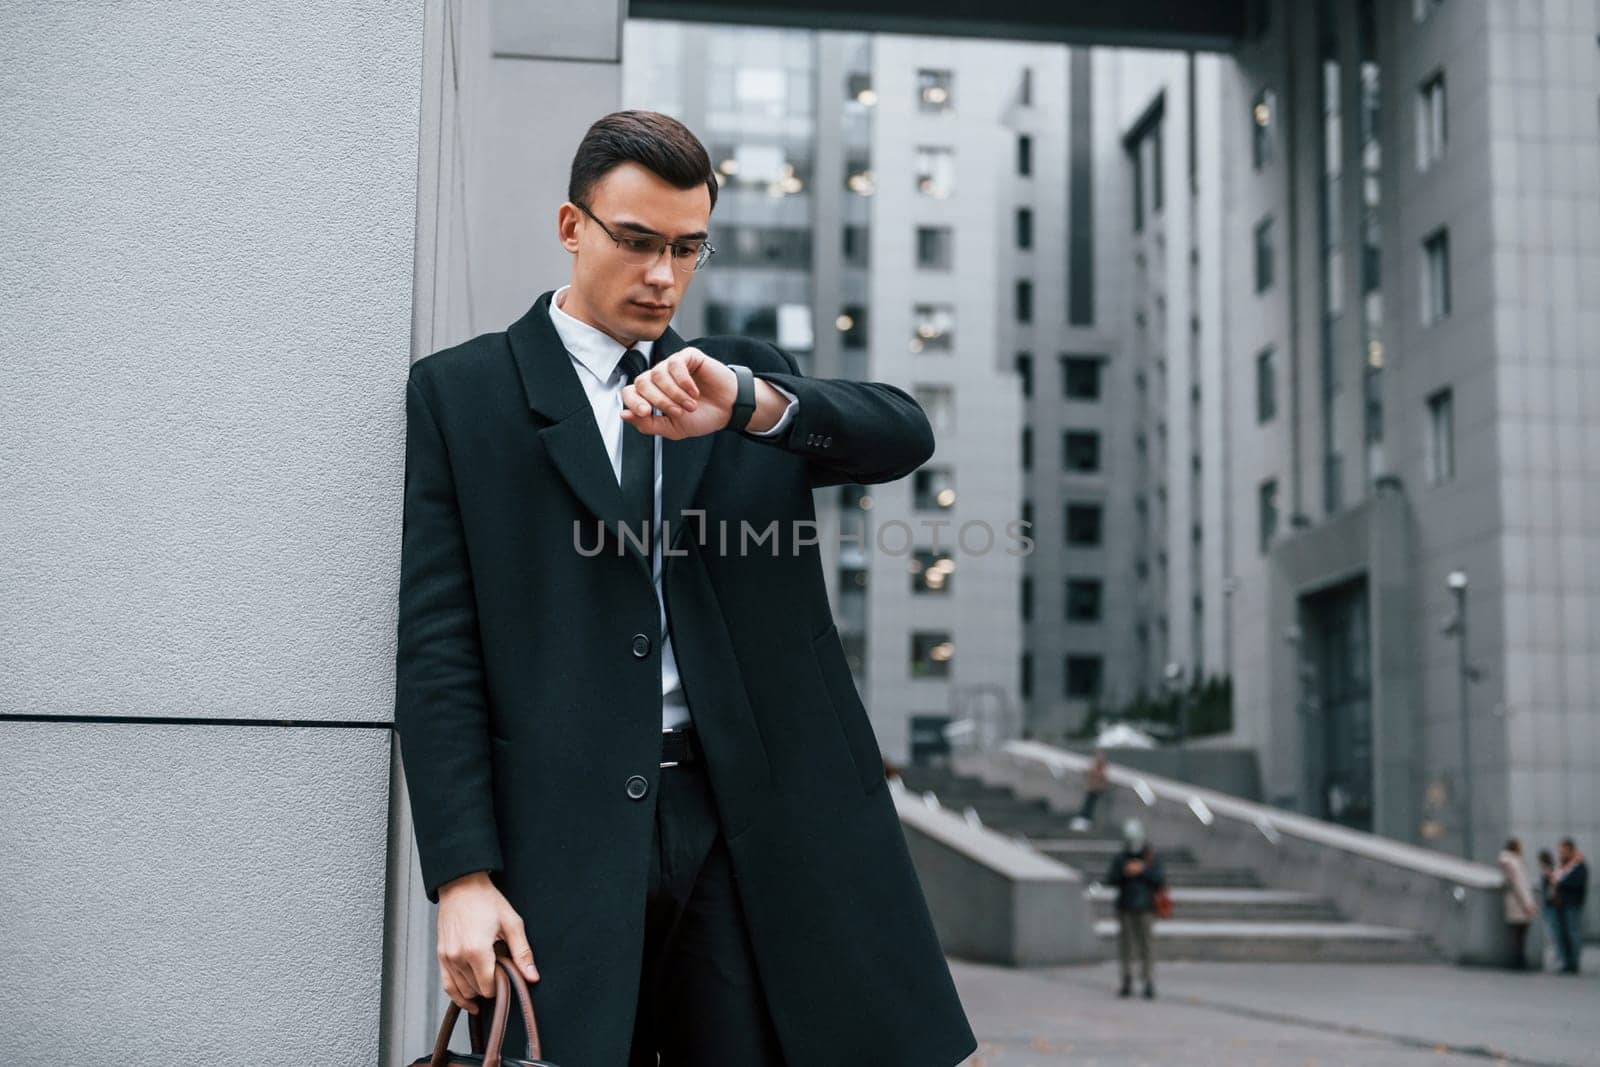 Standing near the building. Businessman in black suit and tie is outdoors in the city by Standret